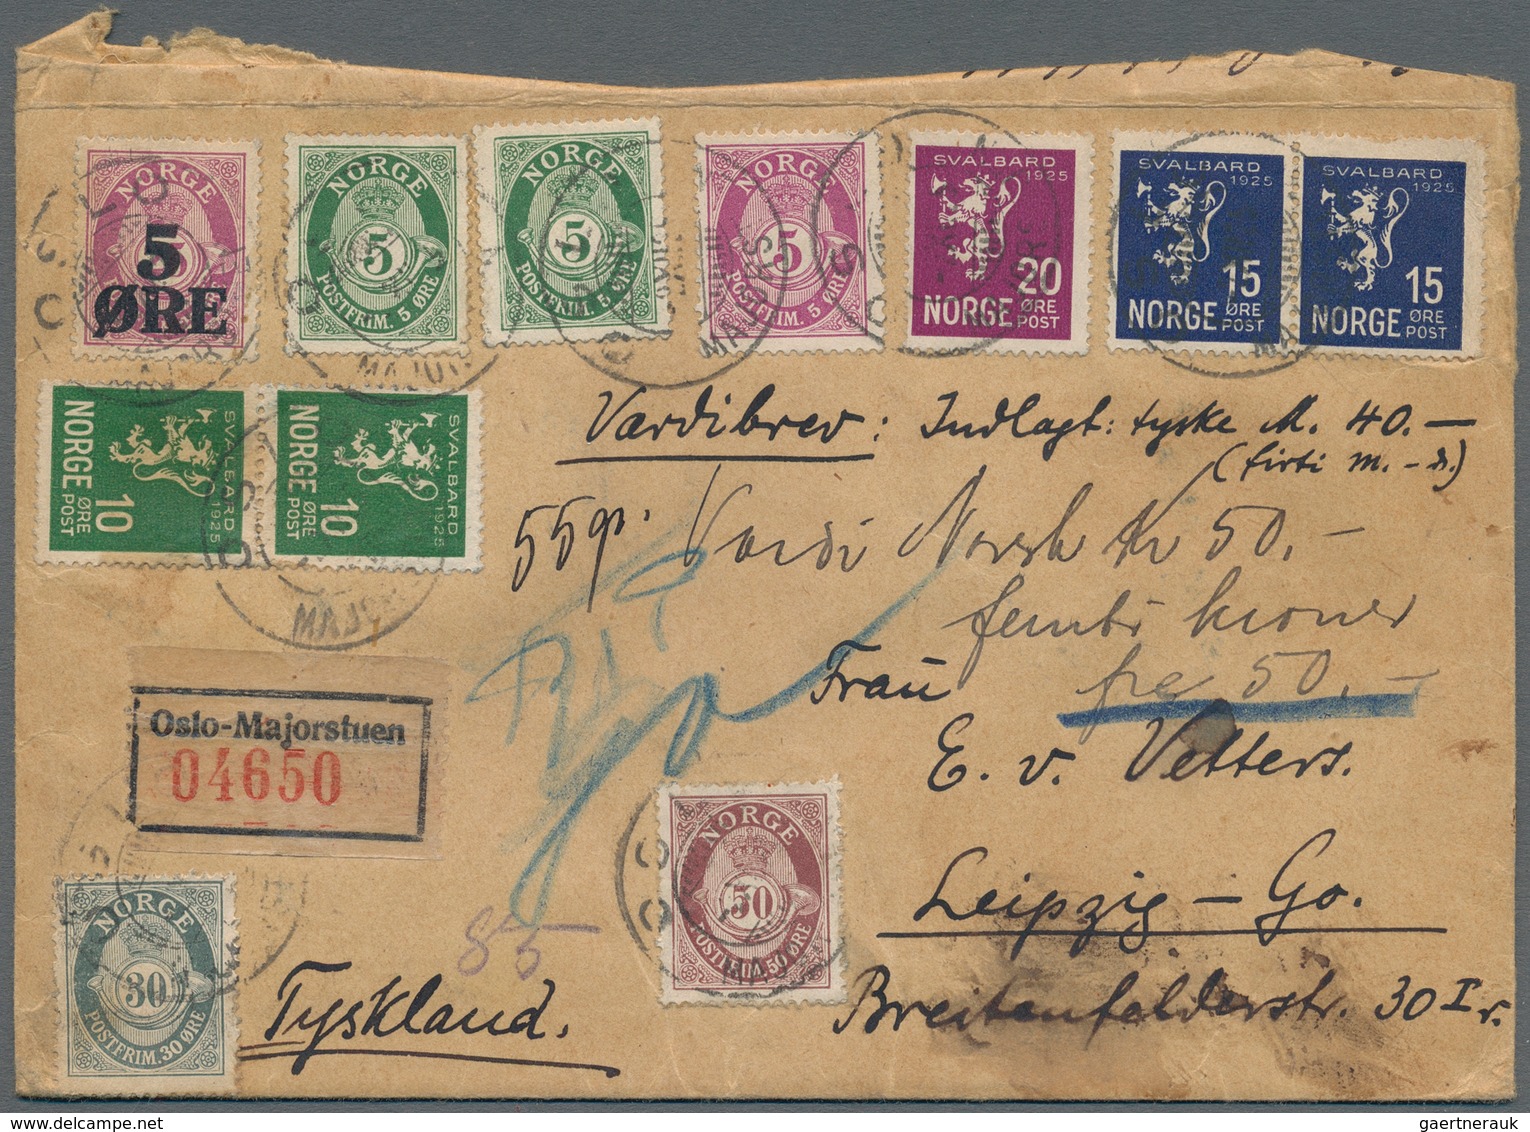 Norwegen: 1925 Value Letter Over 40 Reichsmark With Multicolored Franking From Oslo-Majorstuen To Le - Covers & Documents